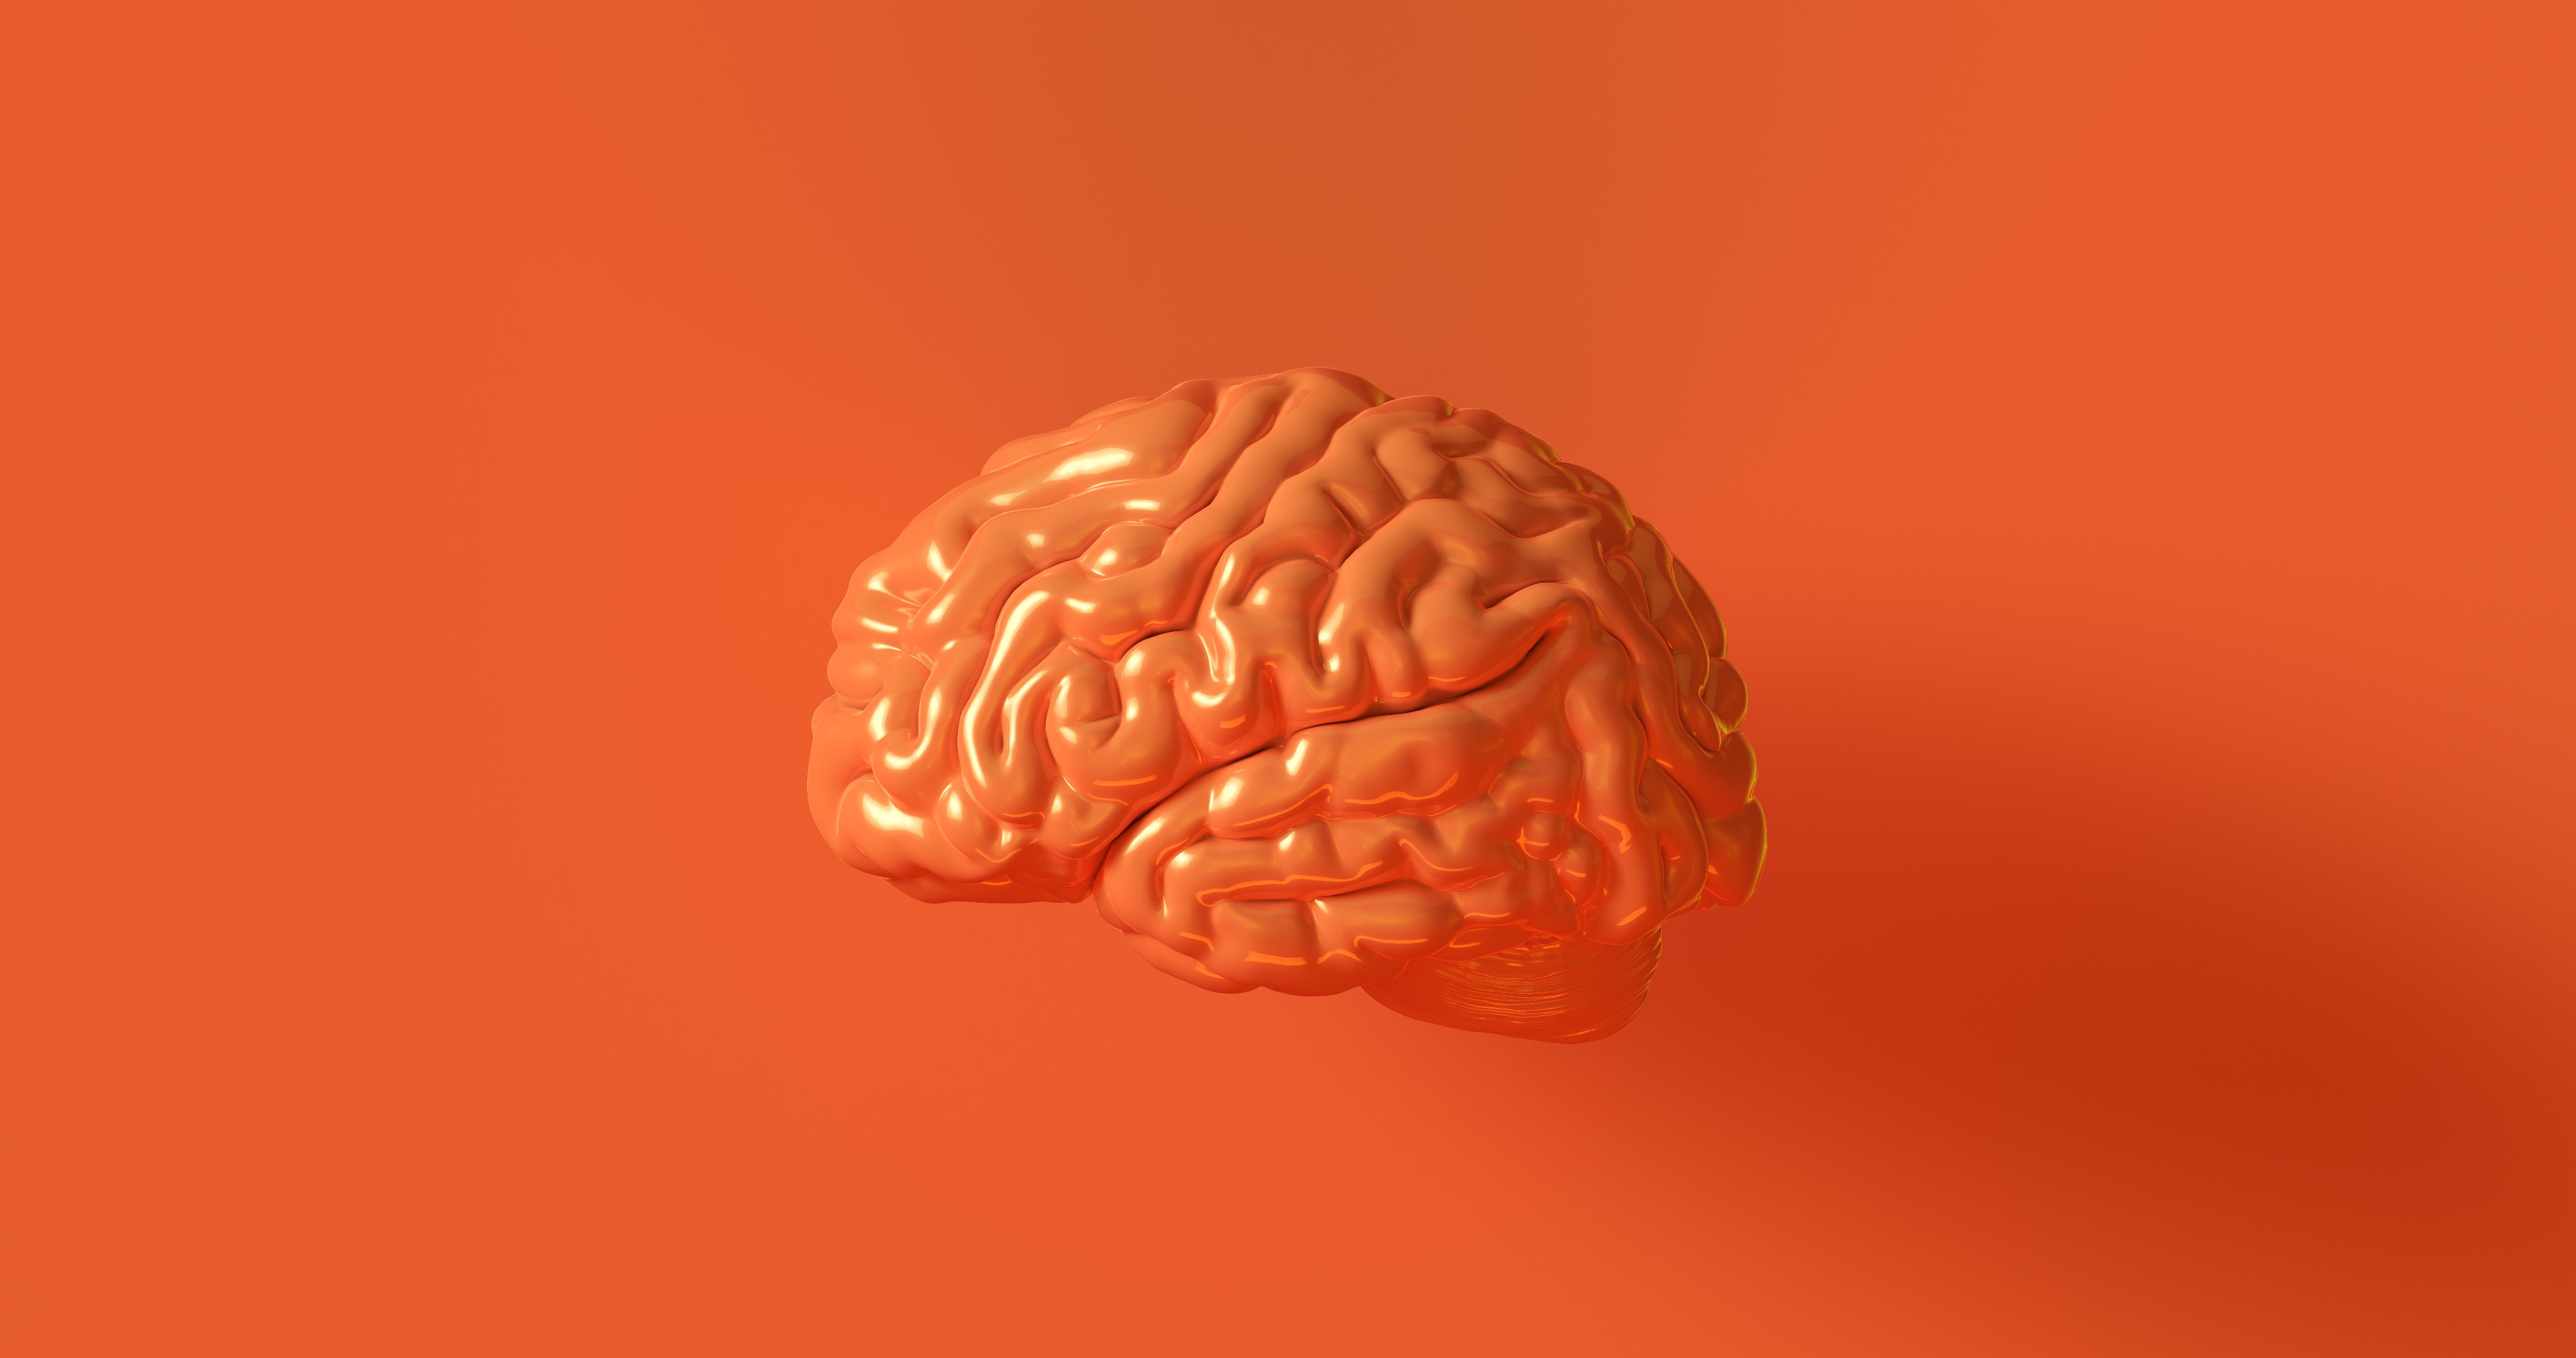 A 3D model of a human brain on an orange background designed to help memorize brain structure.